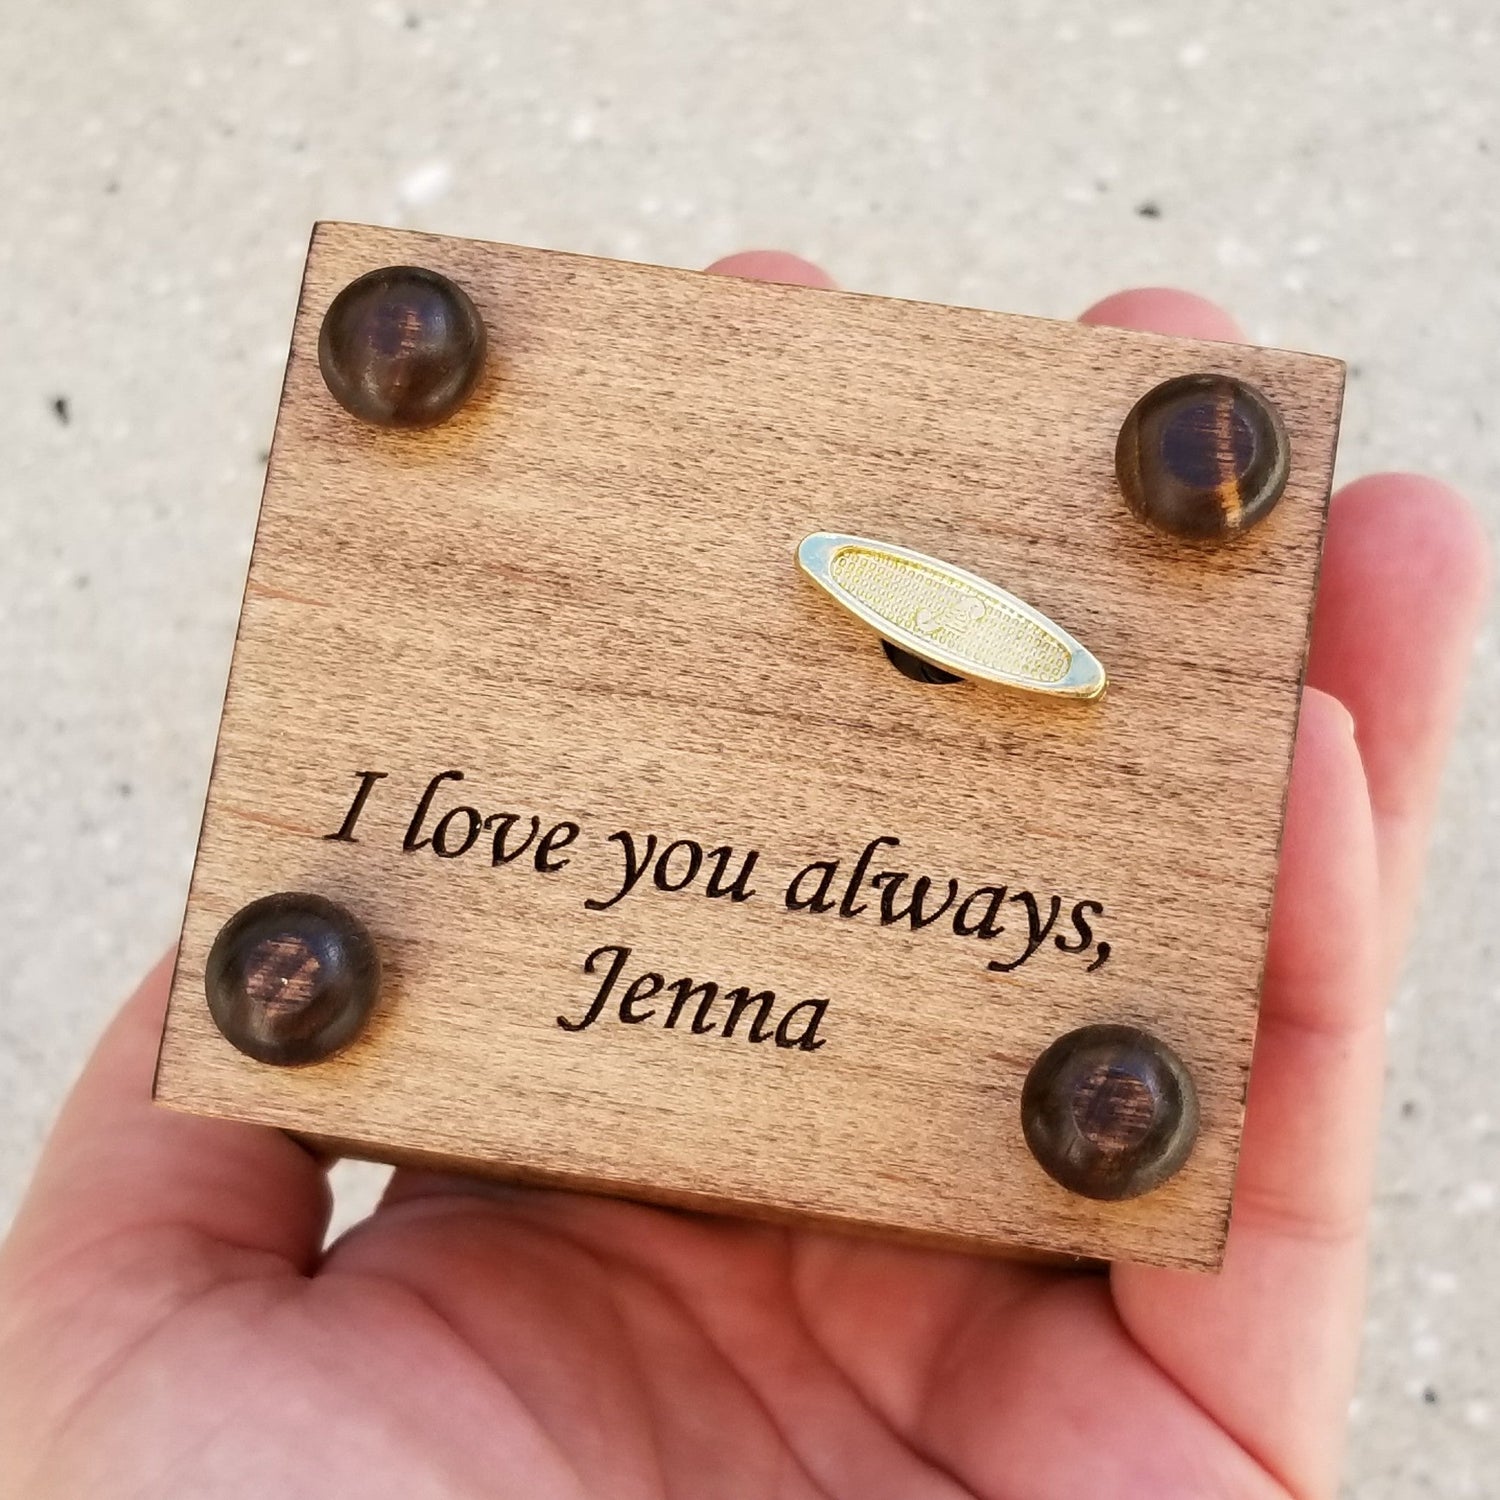 personalized engraving on the bottom side of box